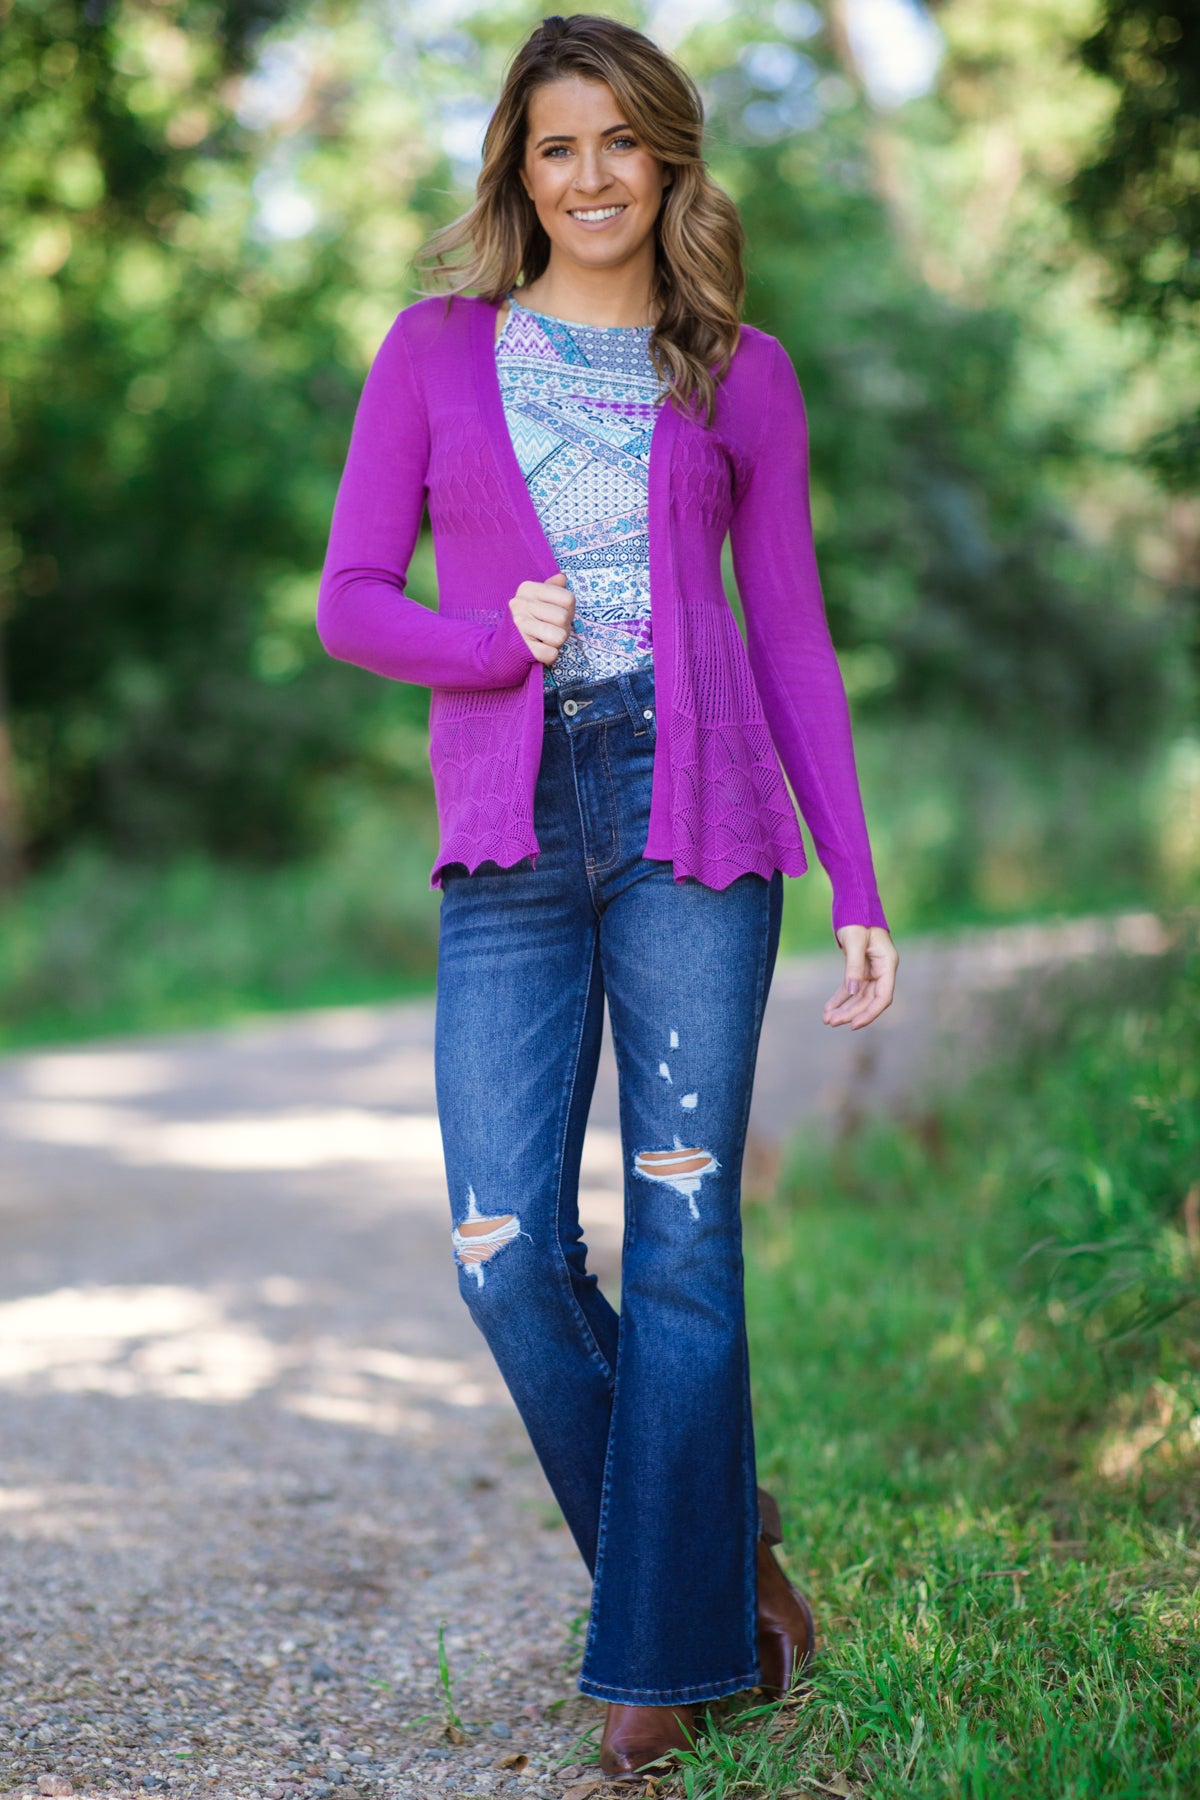 Orchid Scalloped Crochet Lace Trim Cardigan - Filly Flair